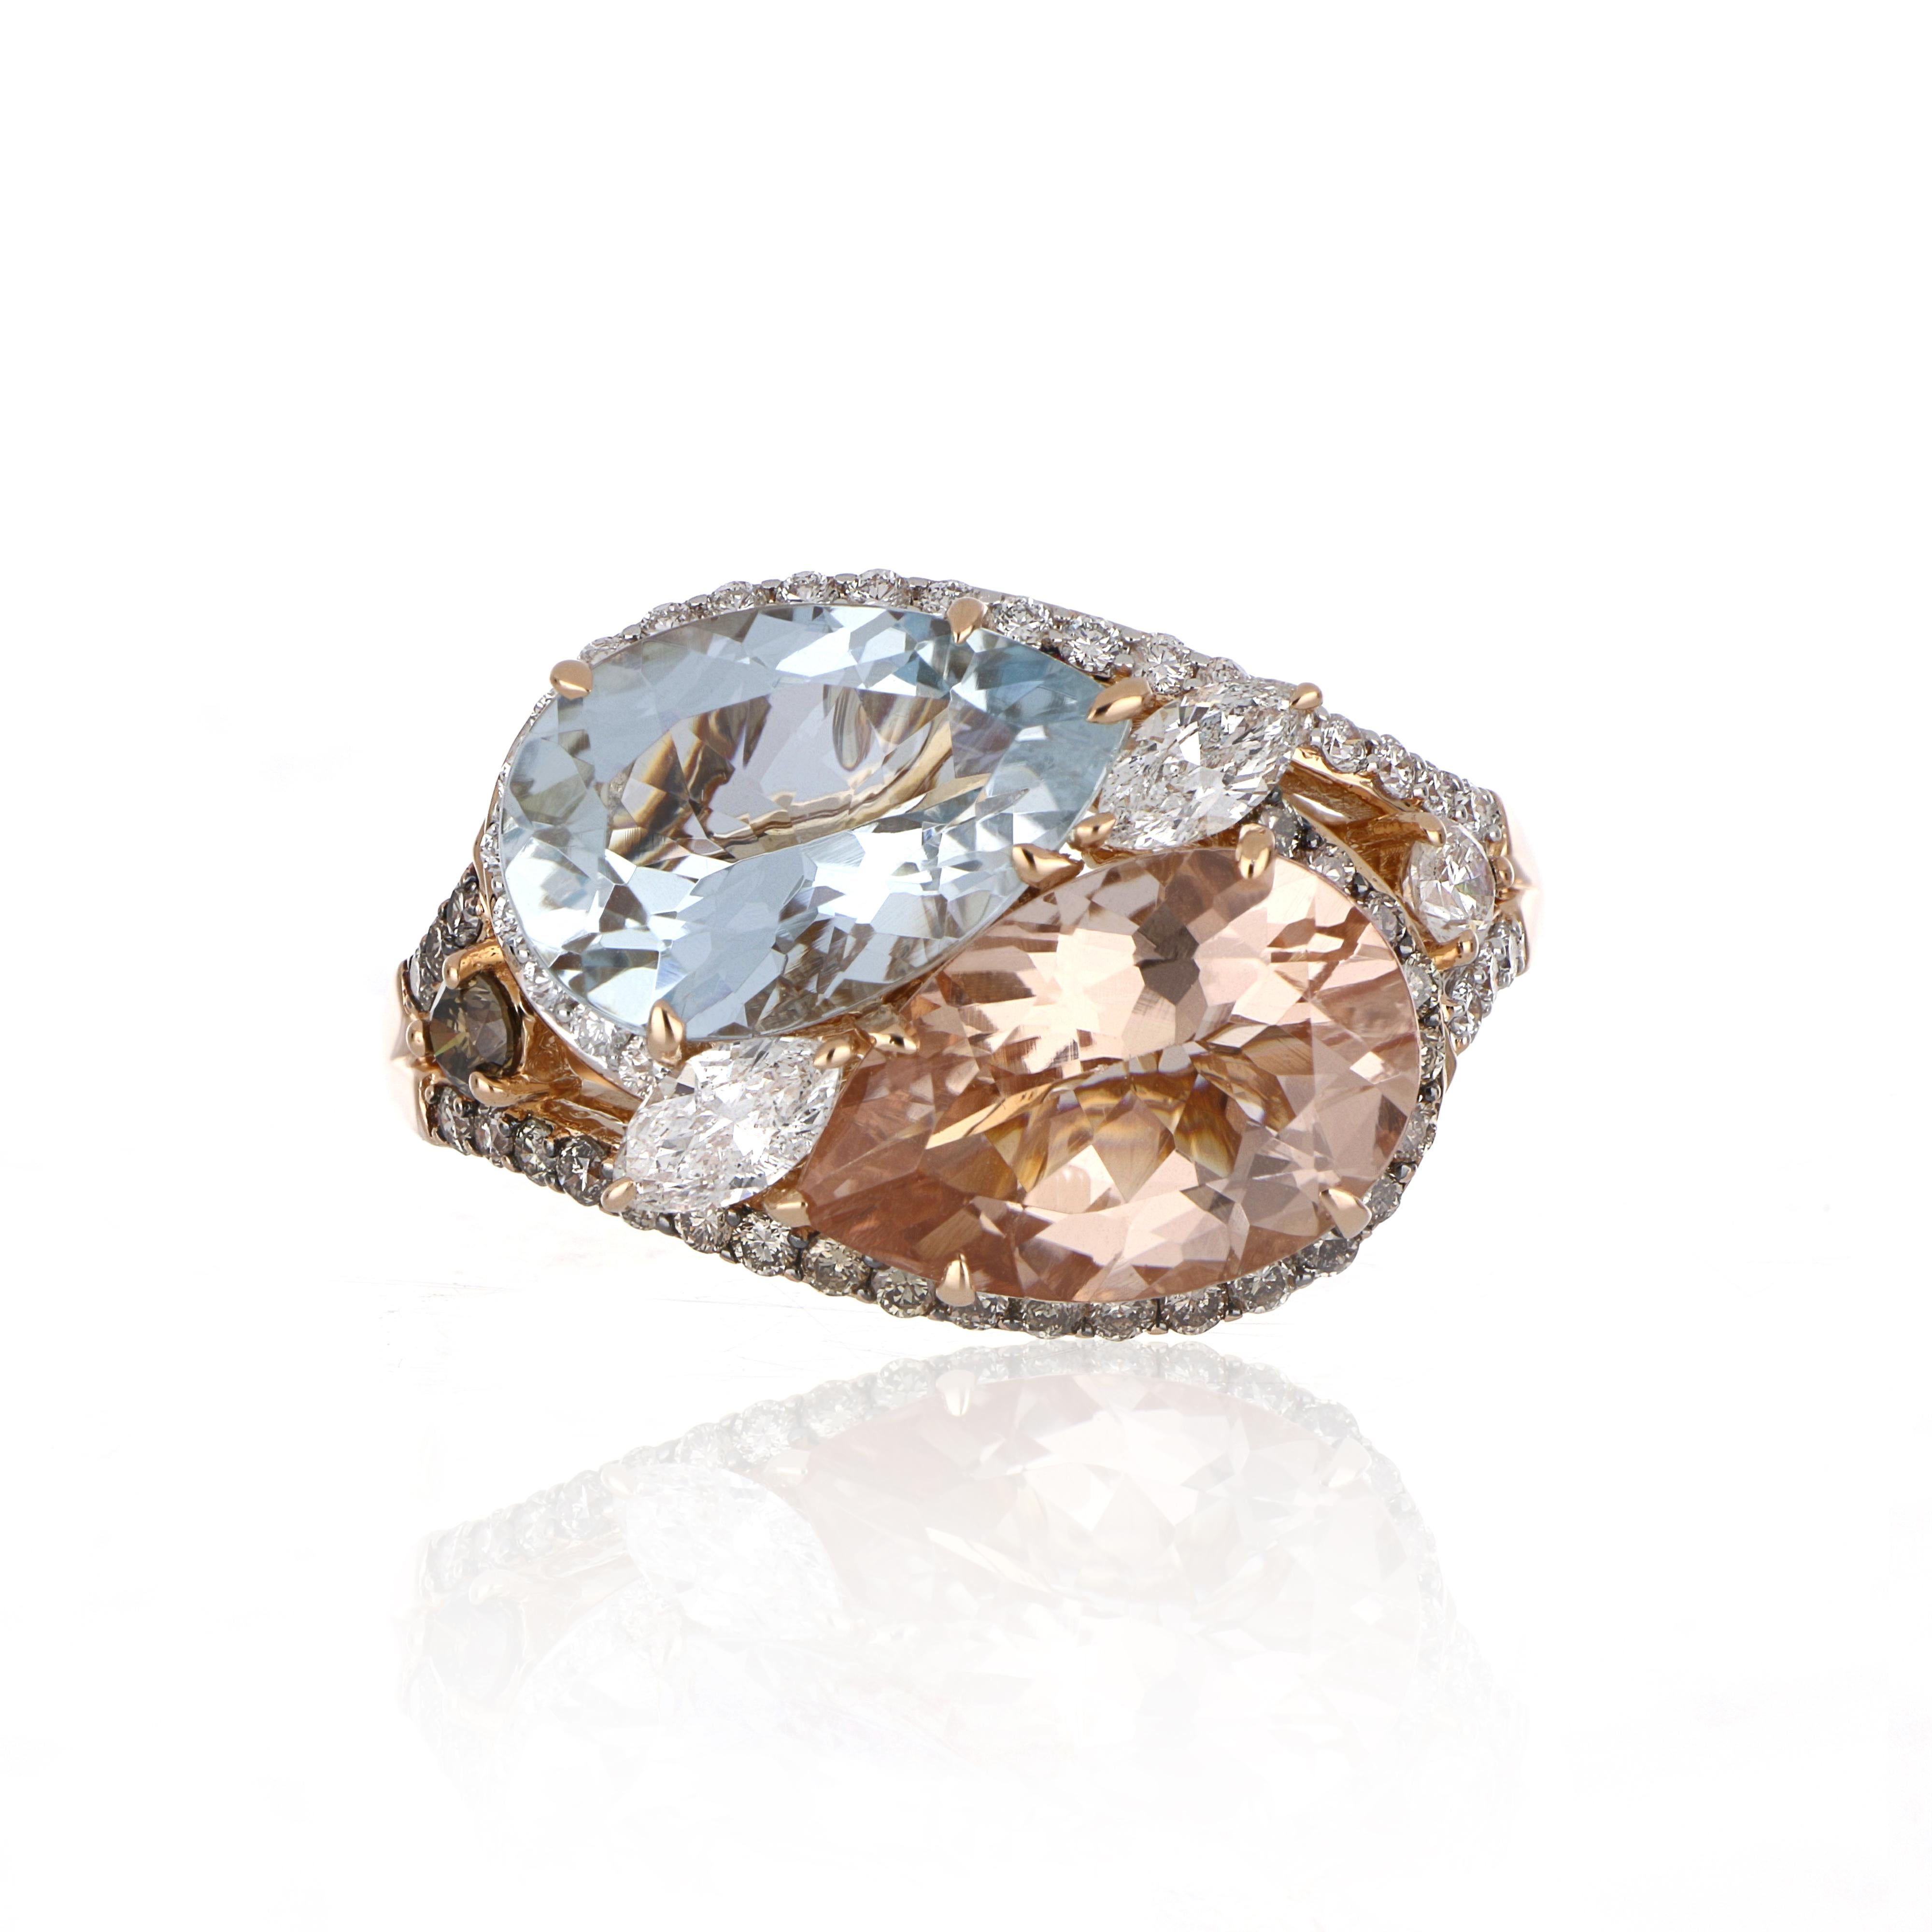 Elegant and exquisitely detailed Cocktail 18K Ring, centre set with 2.36 Cts. Pear Morganite and 2.47 Cts Pear Aquamarine. Surrounded and enhance on shank with white and chocolate colour Diamonds, weighing approx. 0.87 ct. Beautifully Hand crafted